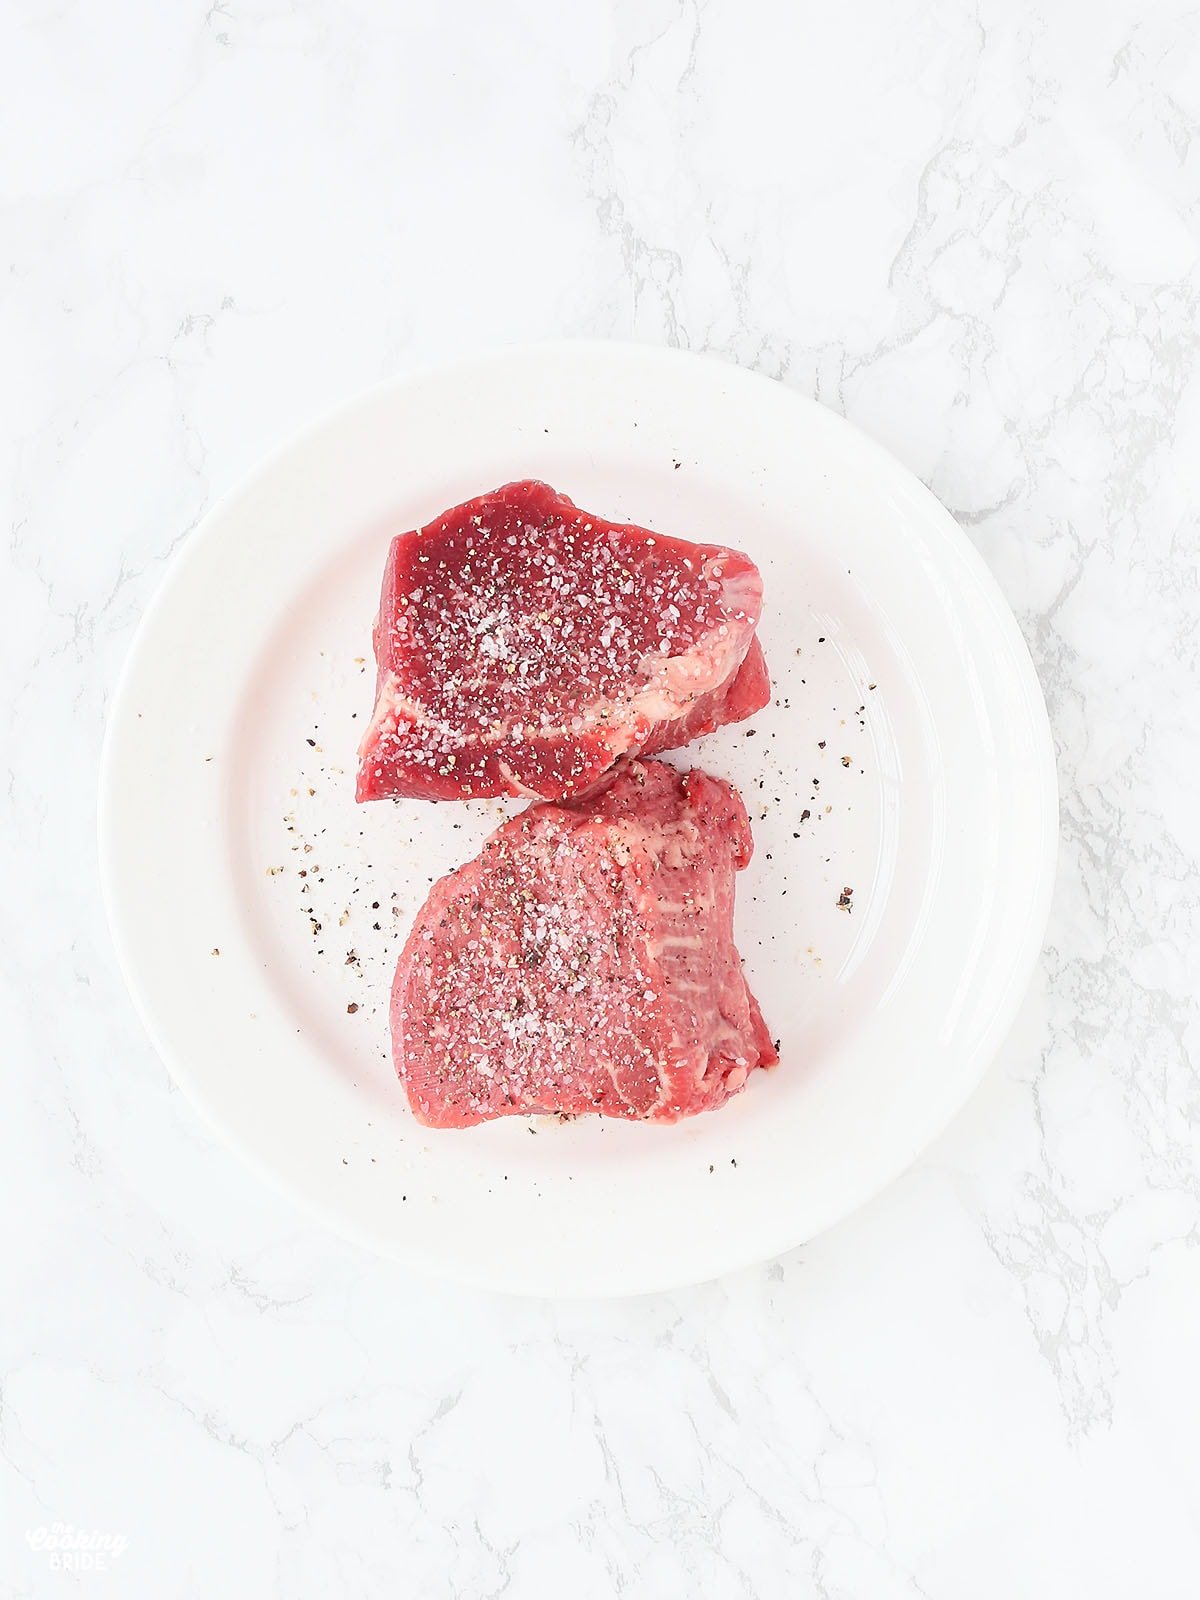 two raw filets seasoned with salt and pepper on a white plate